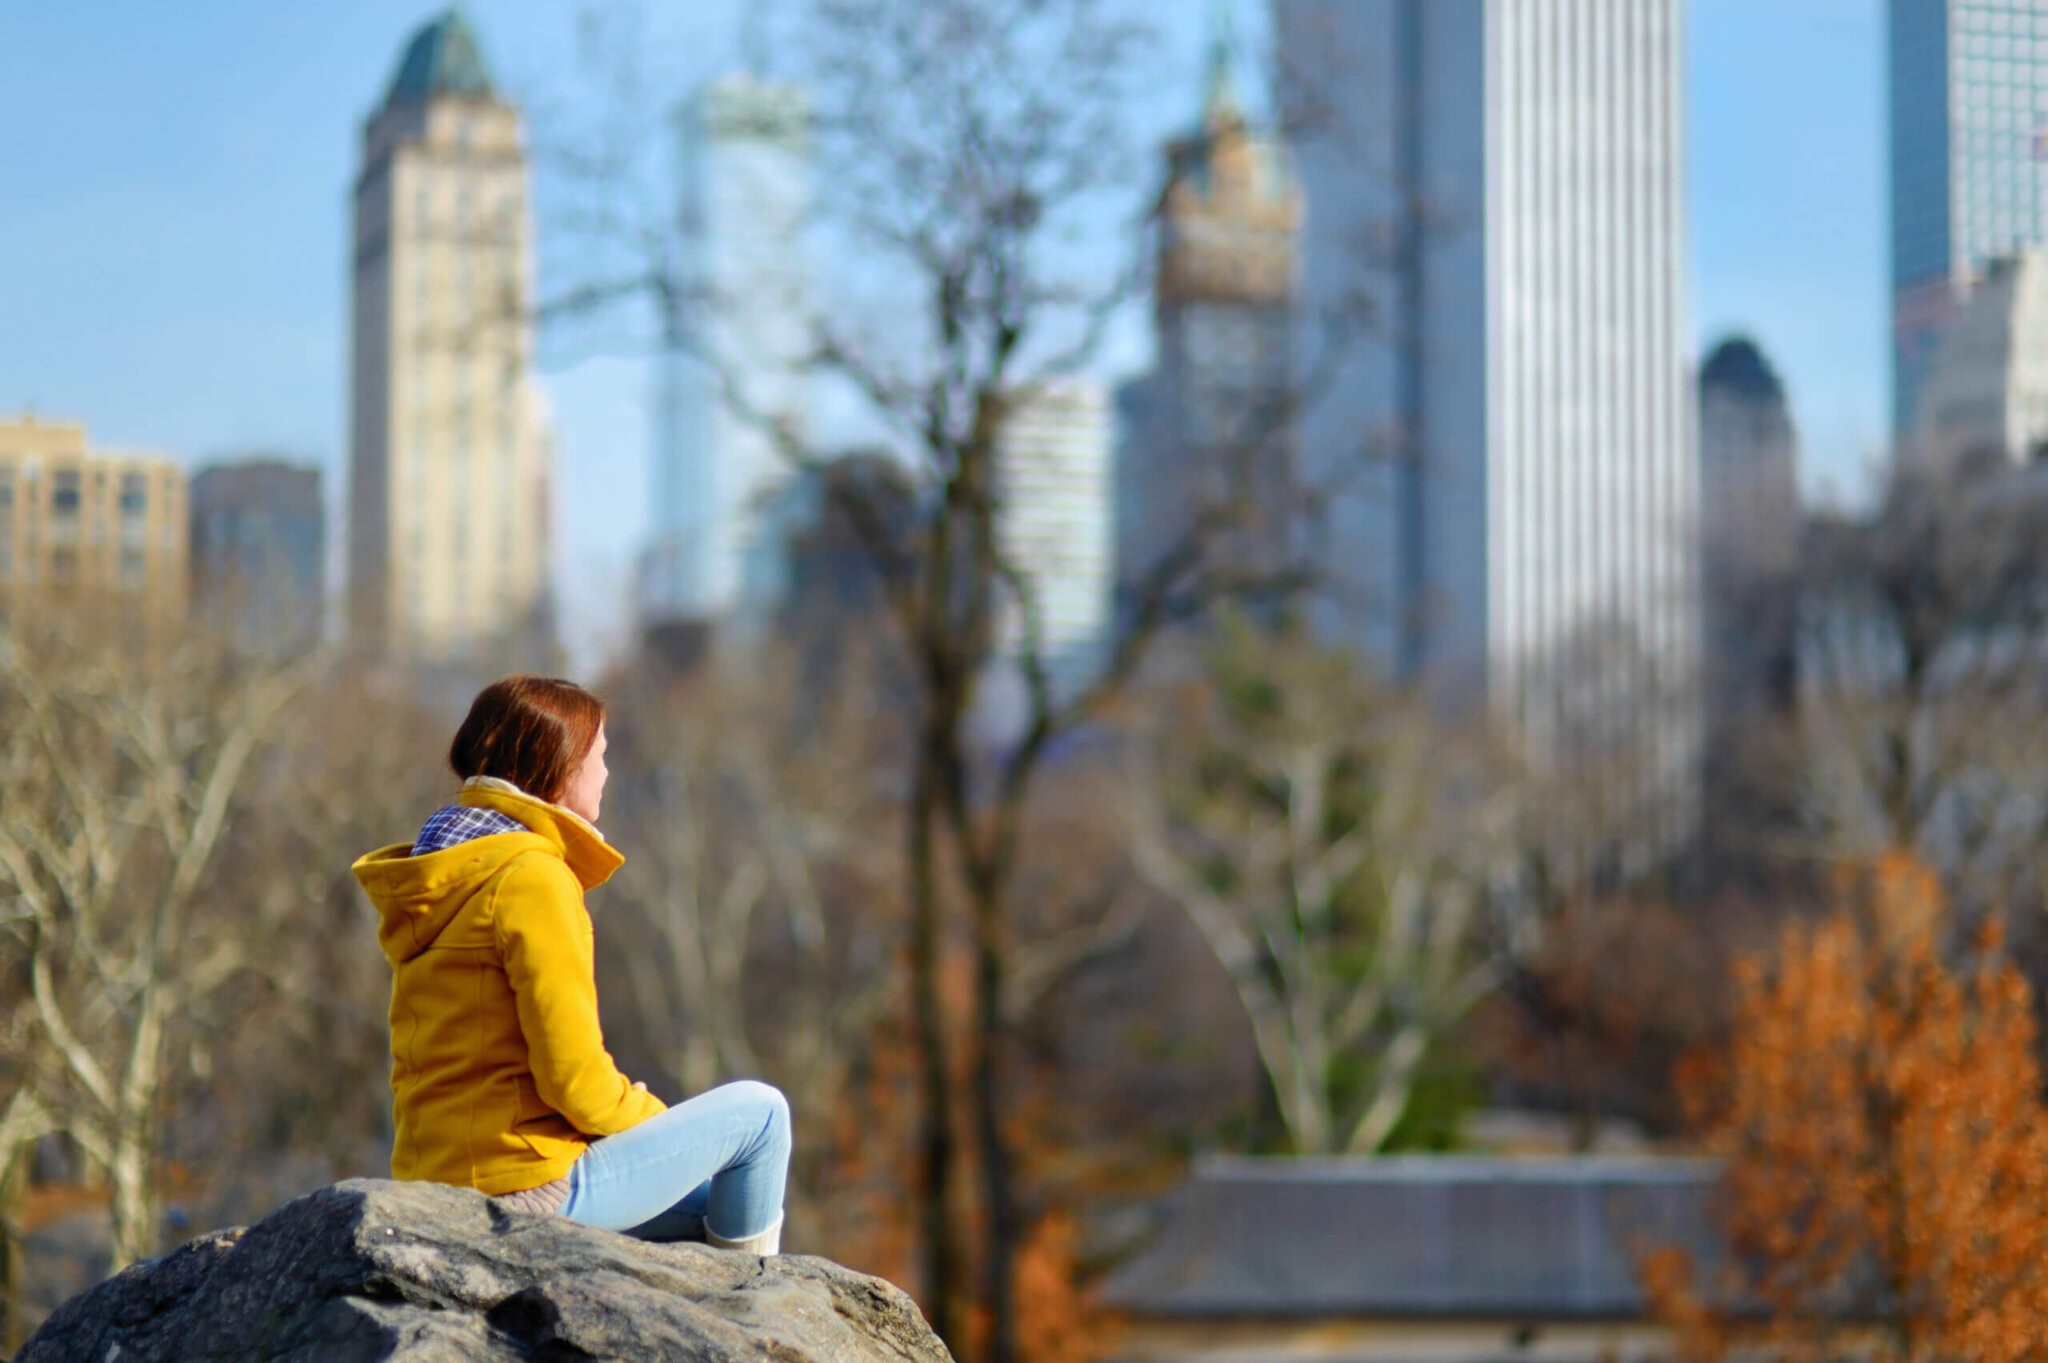 Beautiful young woman looking at skyscrapers while sitting on a rock in Central Park, New York